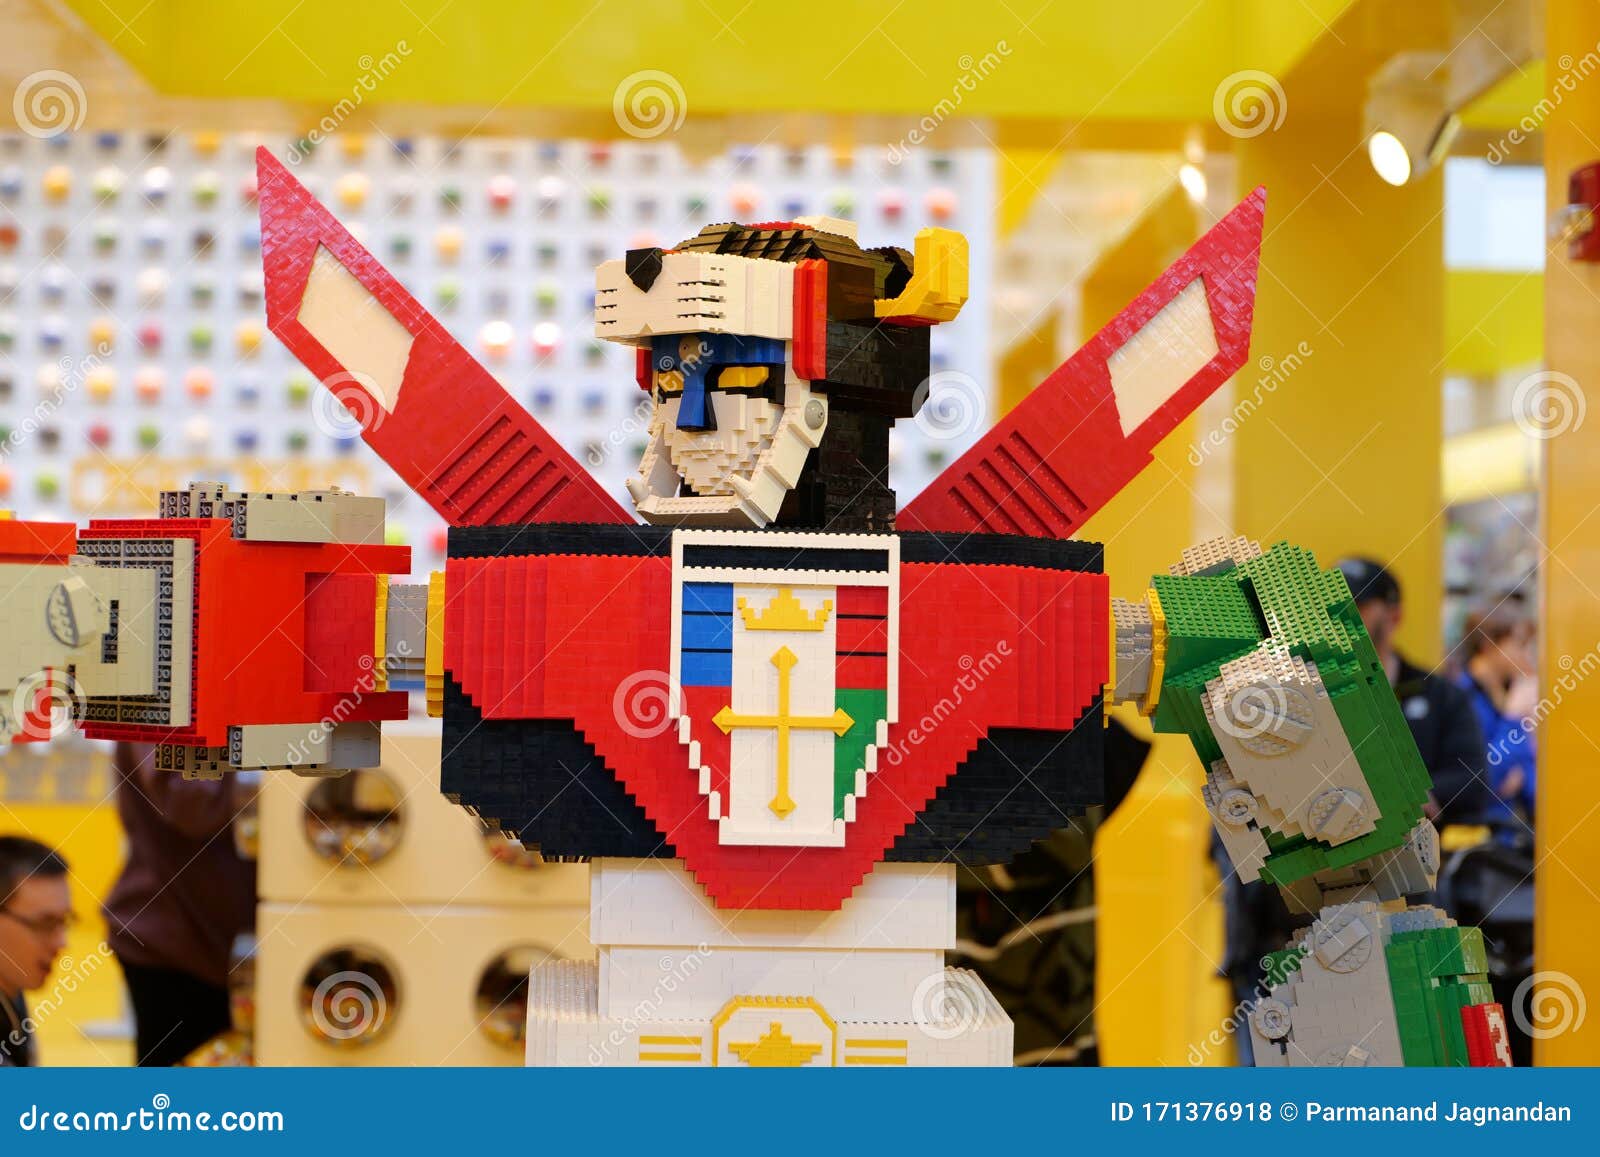 Lego Version of Voltron Anime Character Editorial Stock Photo - Image of  robot, popular: 171376918